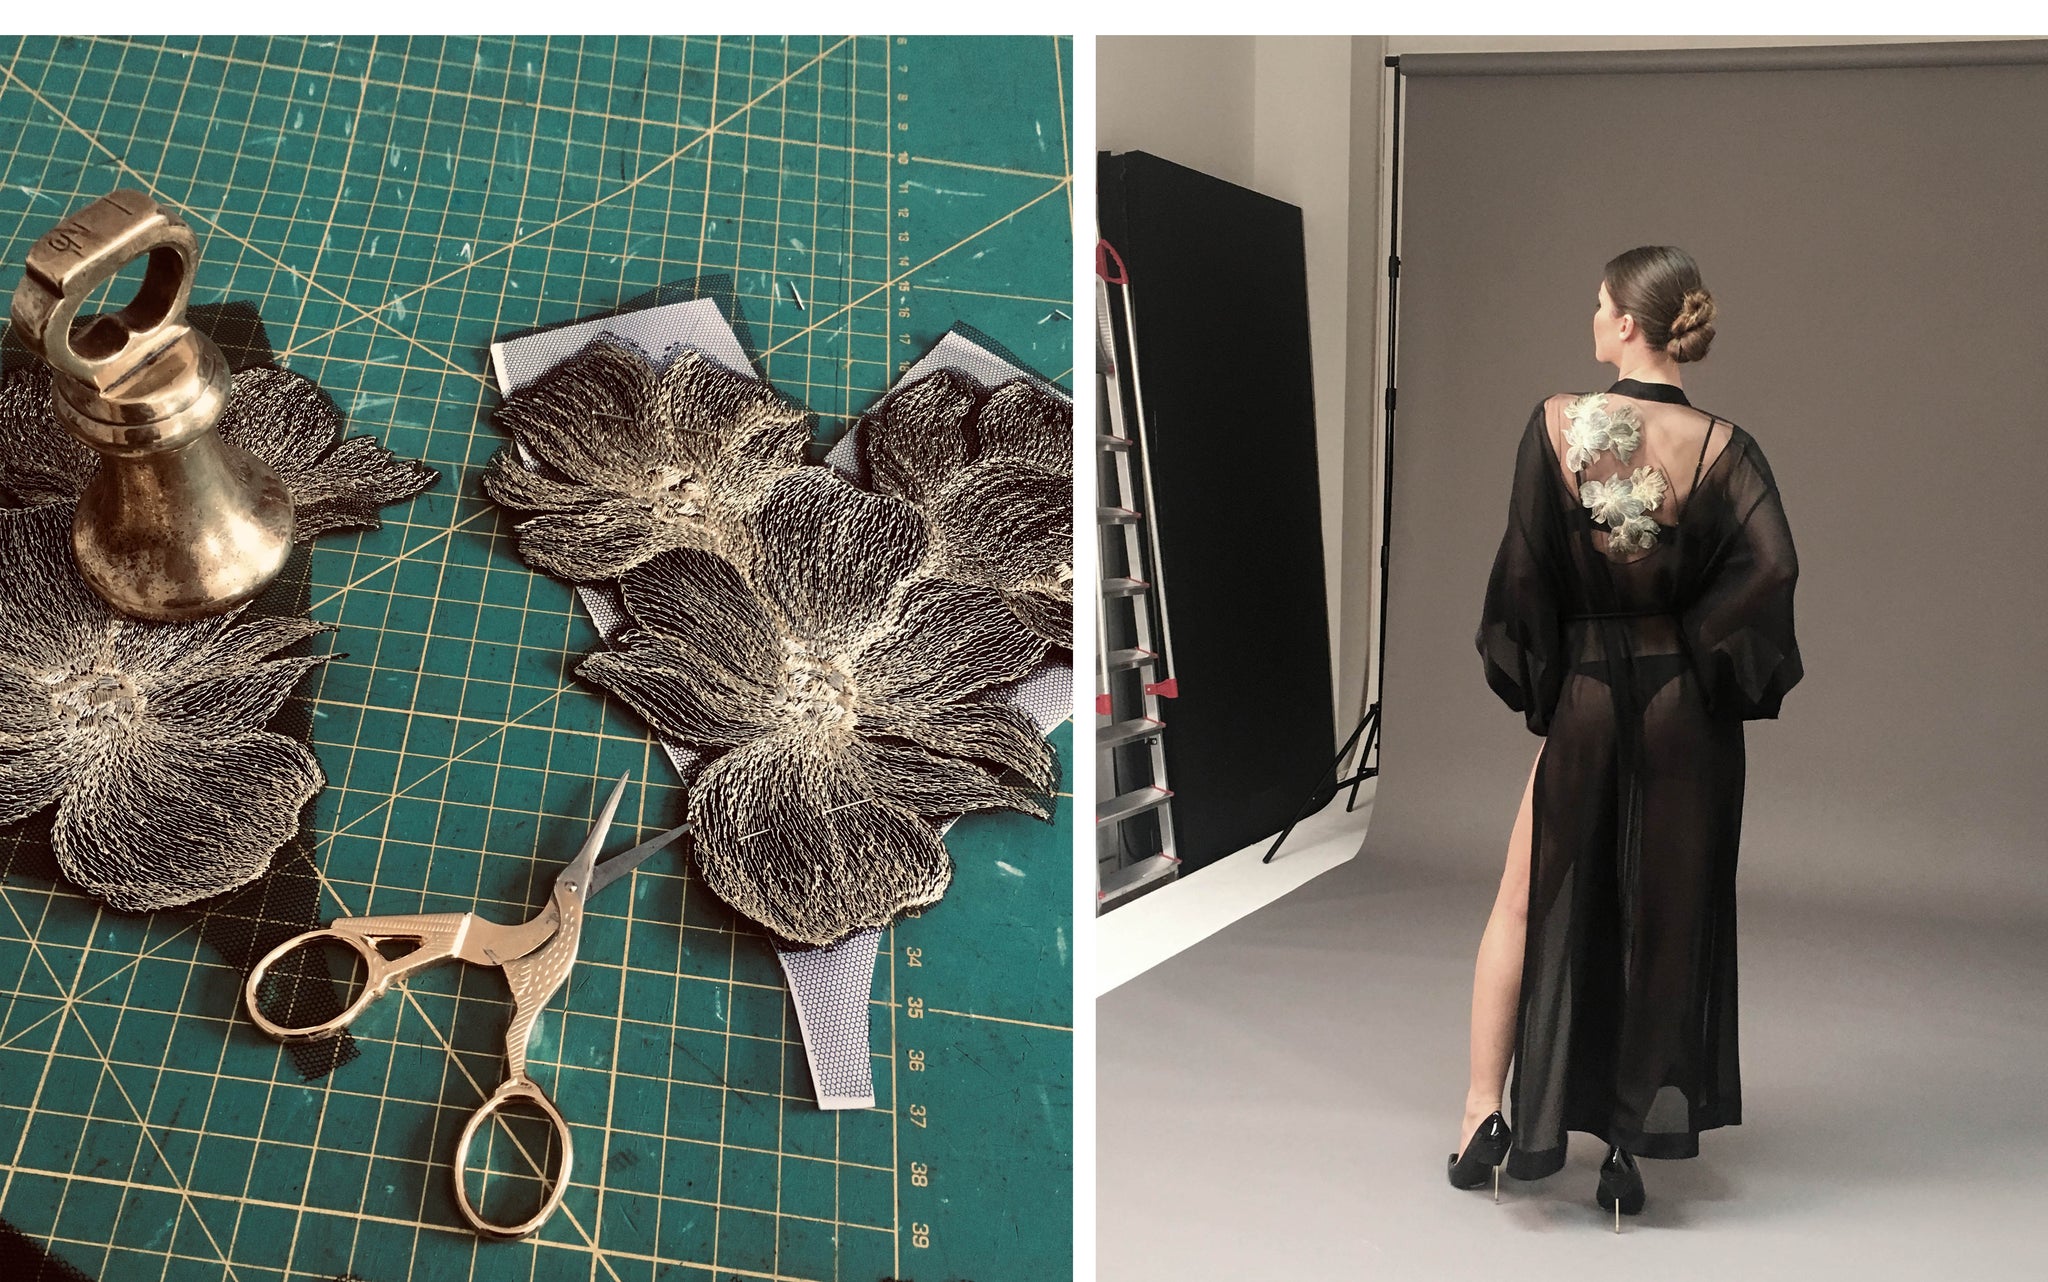 Hand appliqued couture embroidery and behind the scenes photoshoot